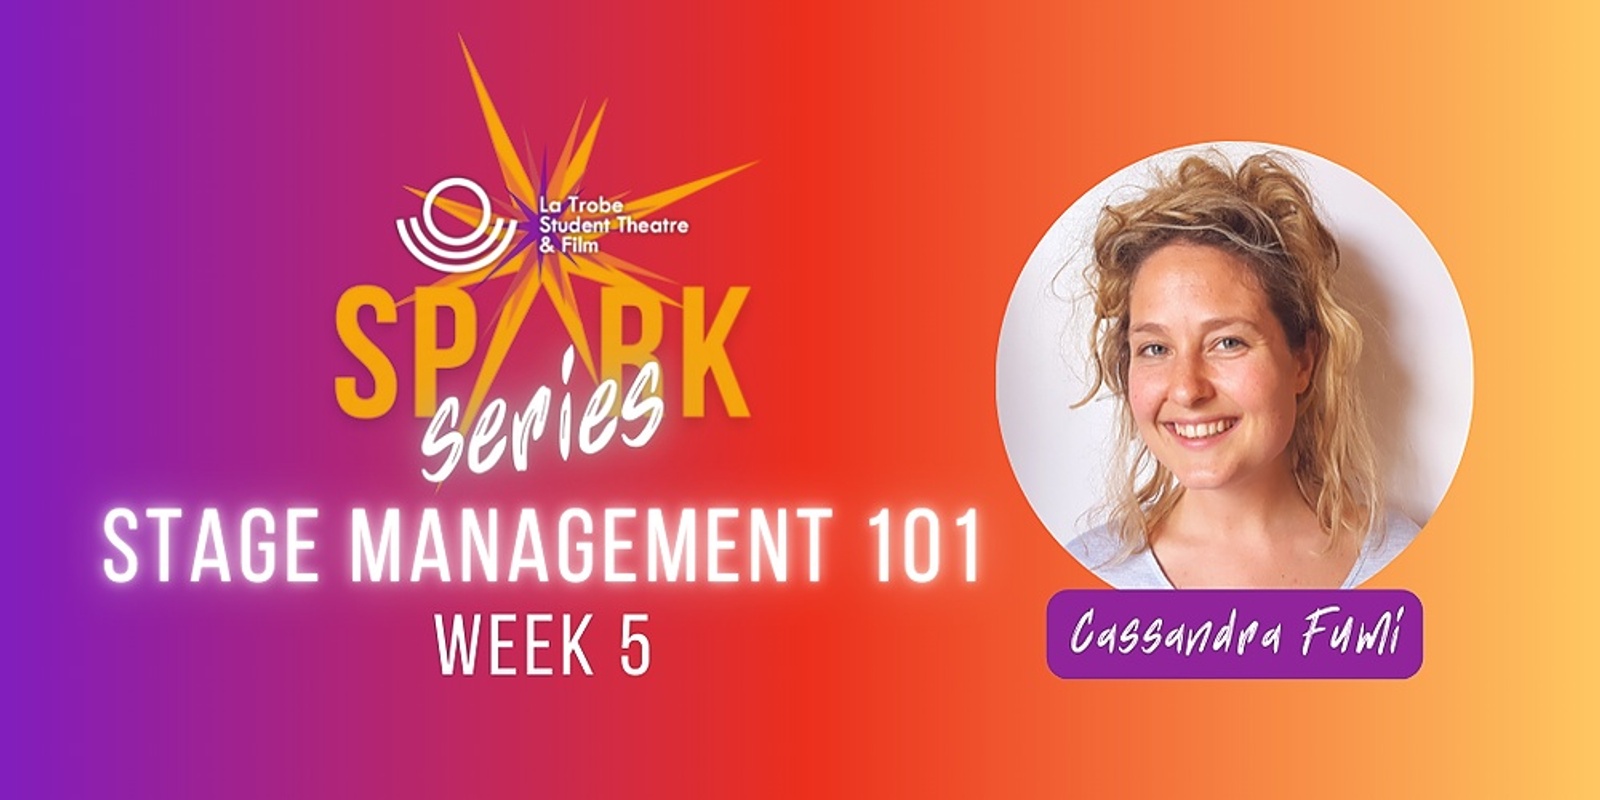 Banner image for STF Spark Series: Stage Management 101 with Cassandra Fumi